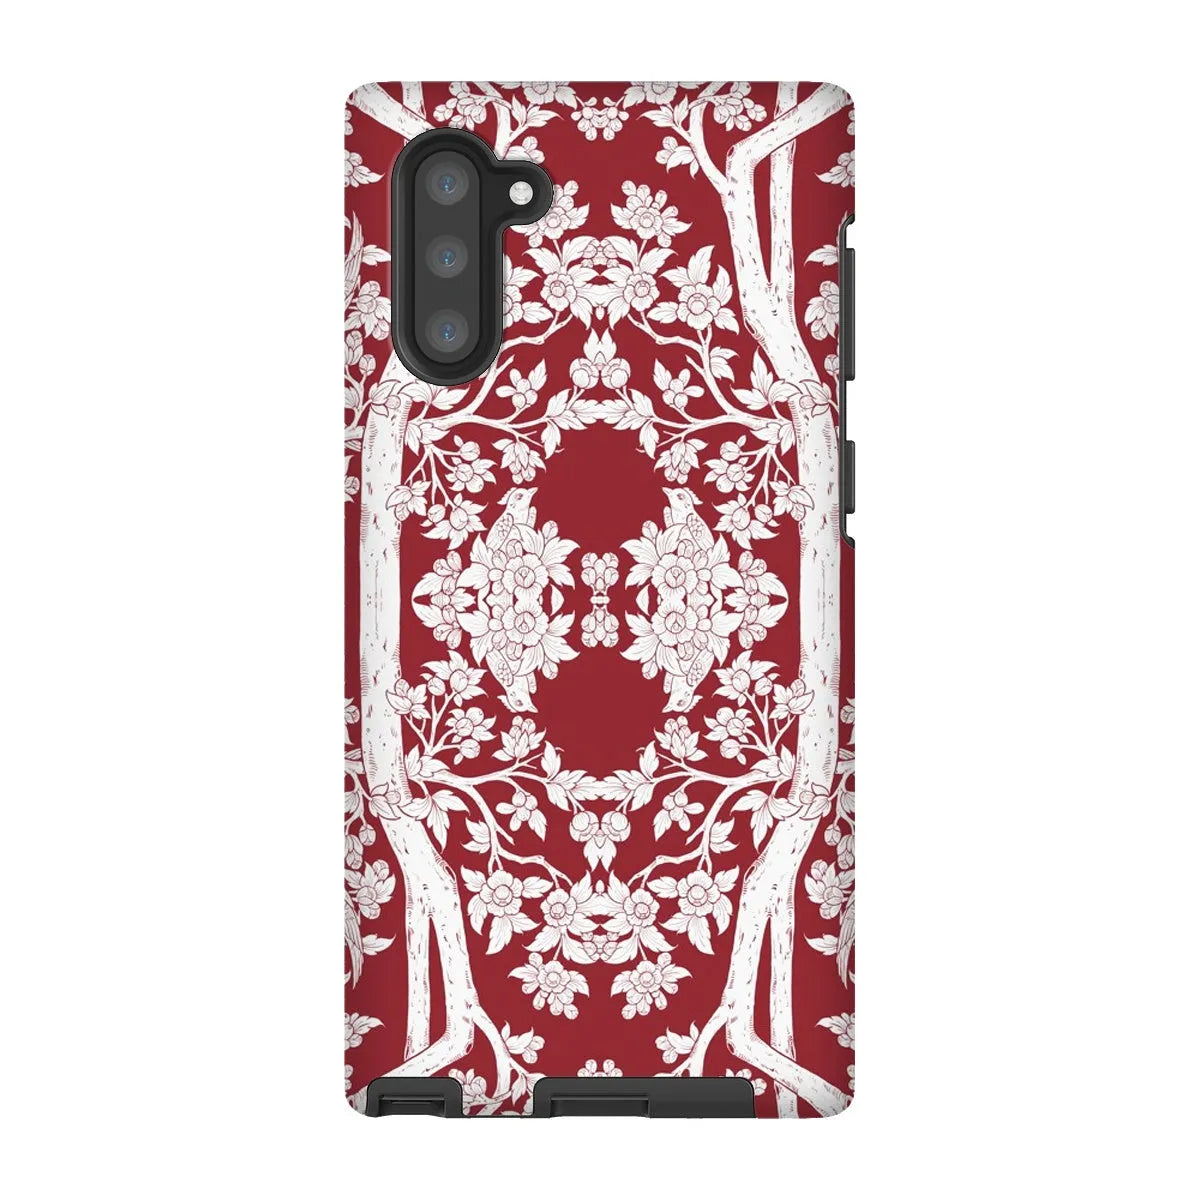 Aviary Red Aesthetic Pattern Art Phone Case - Samsung Galaxy Note 10 / Matte - Mobile Phone Cases - Aesthetic Art